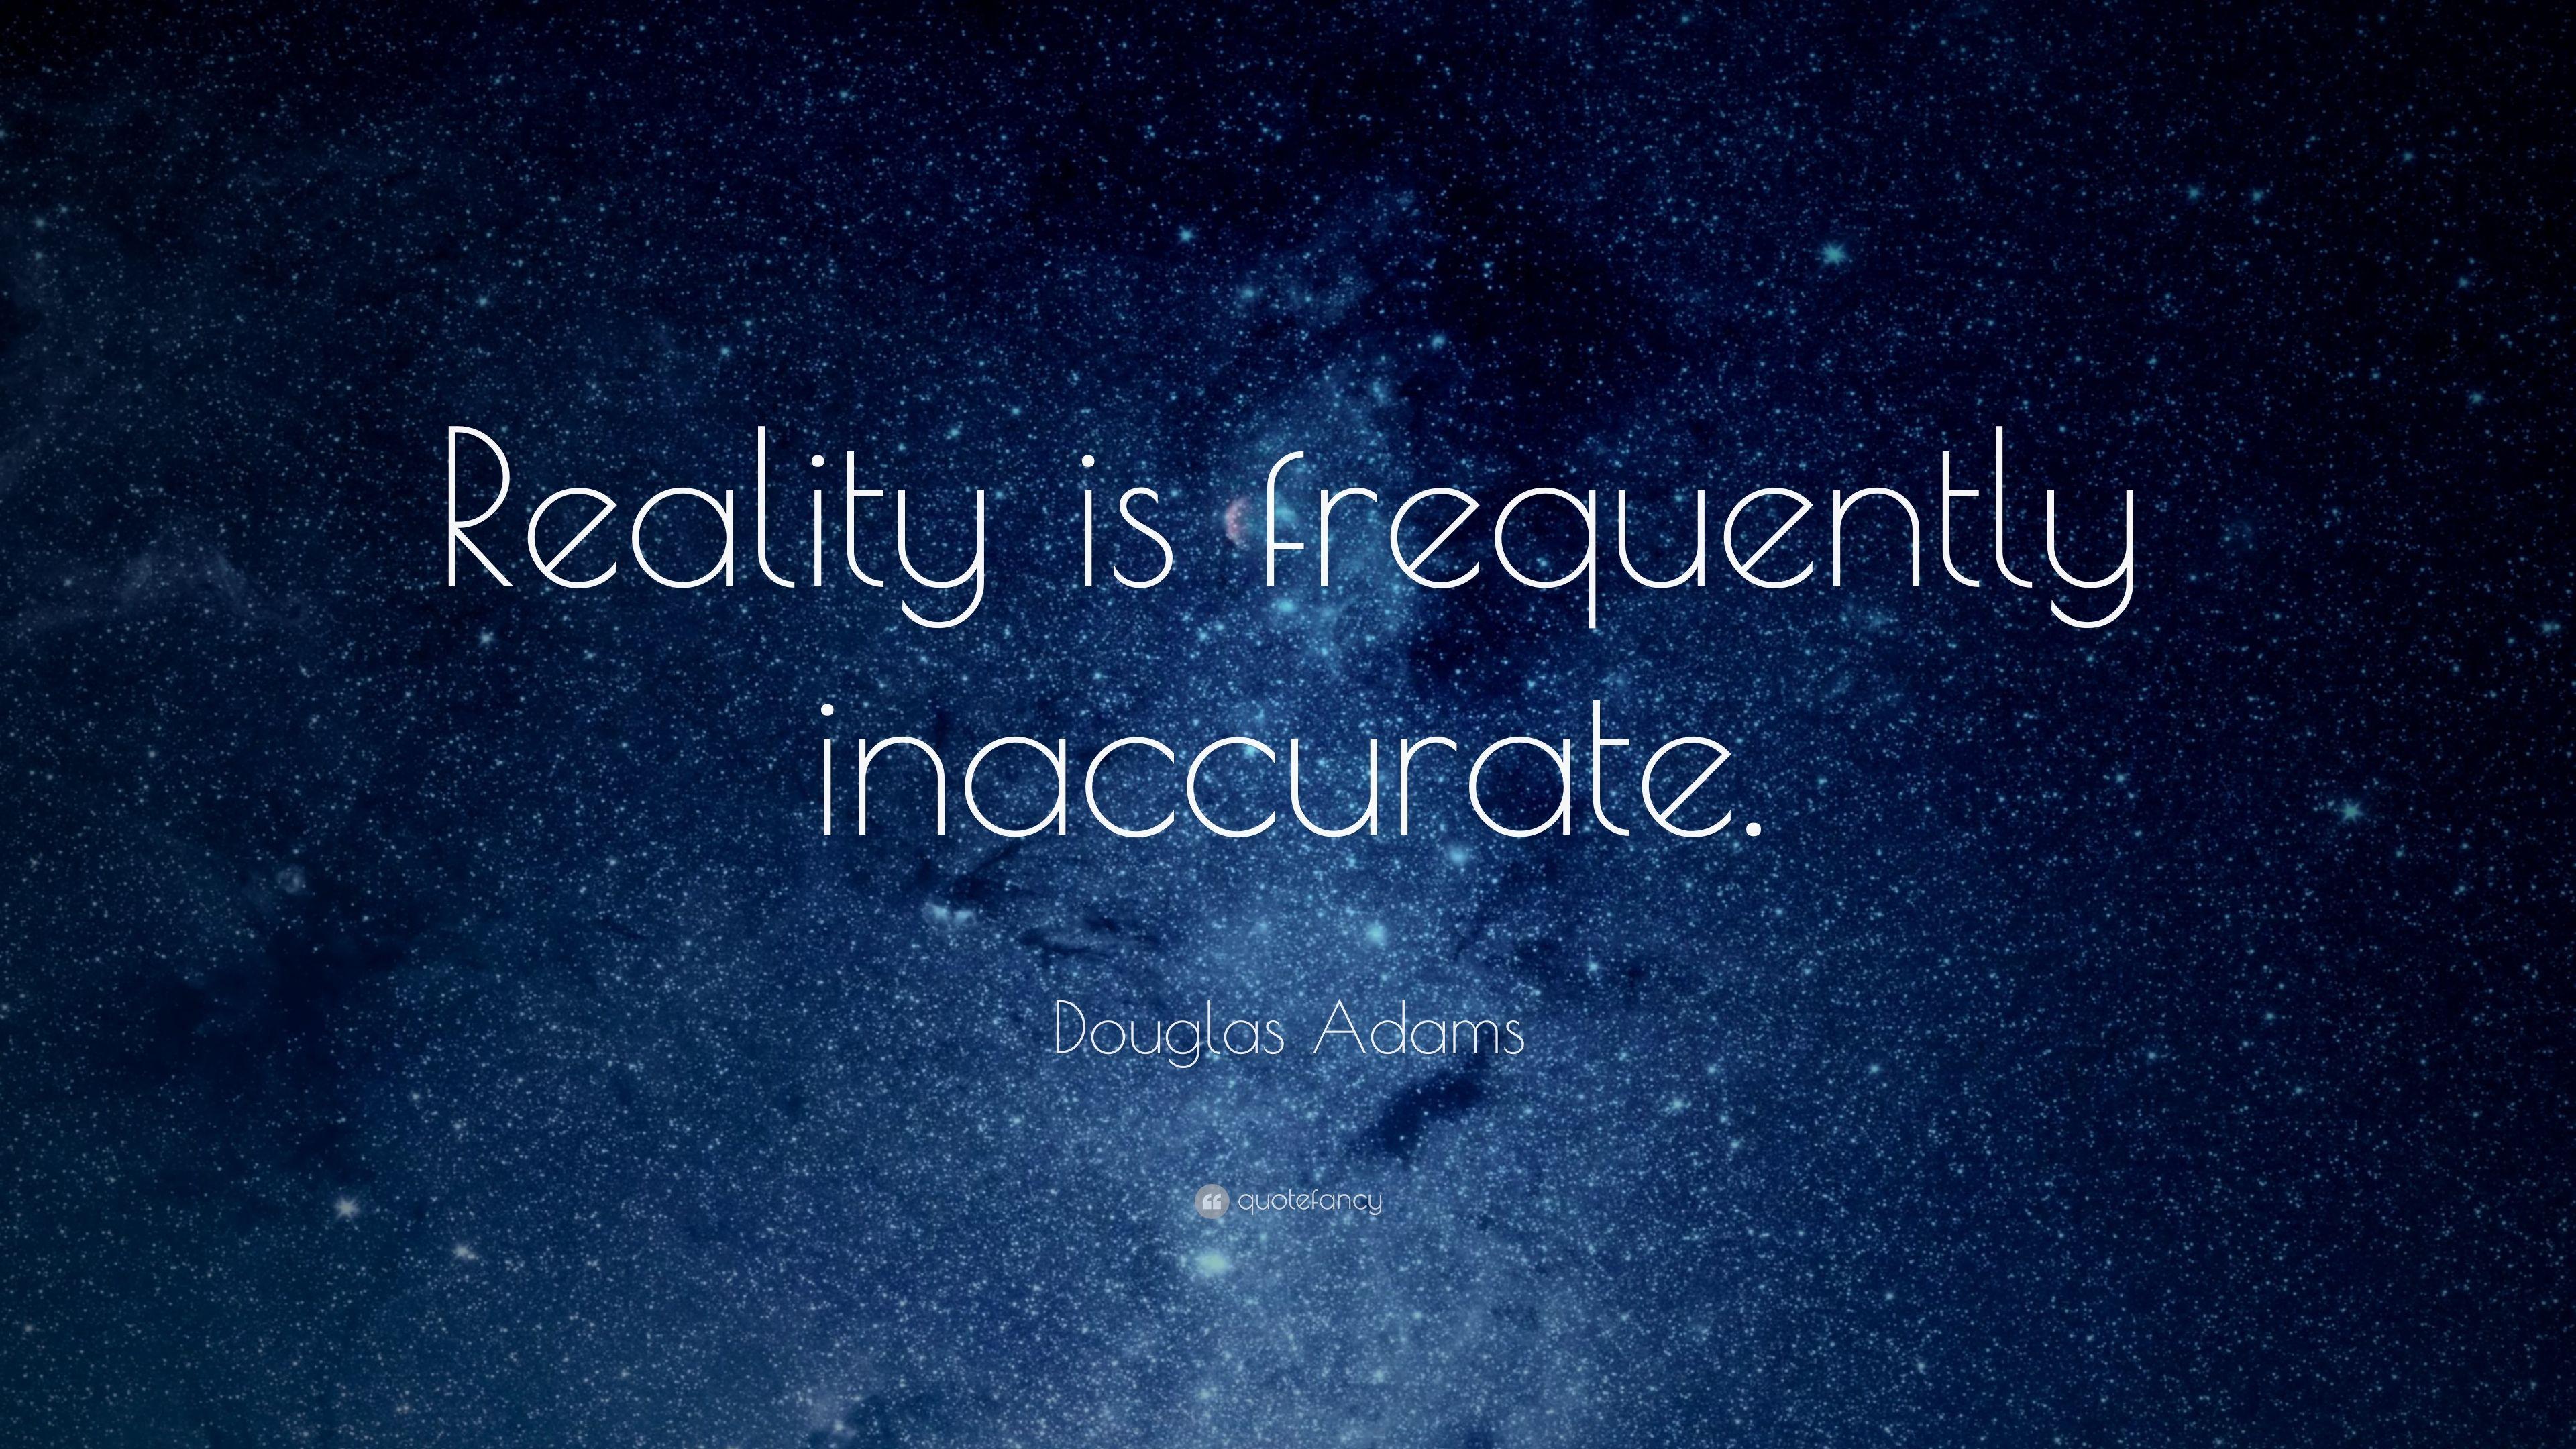 Douglas Adams Quote: “Reality is frequently inaccurate.” 16